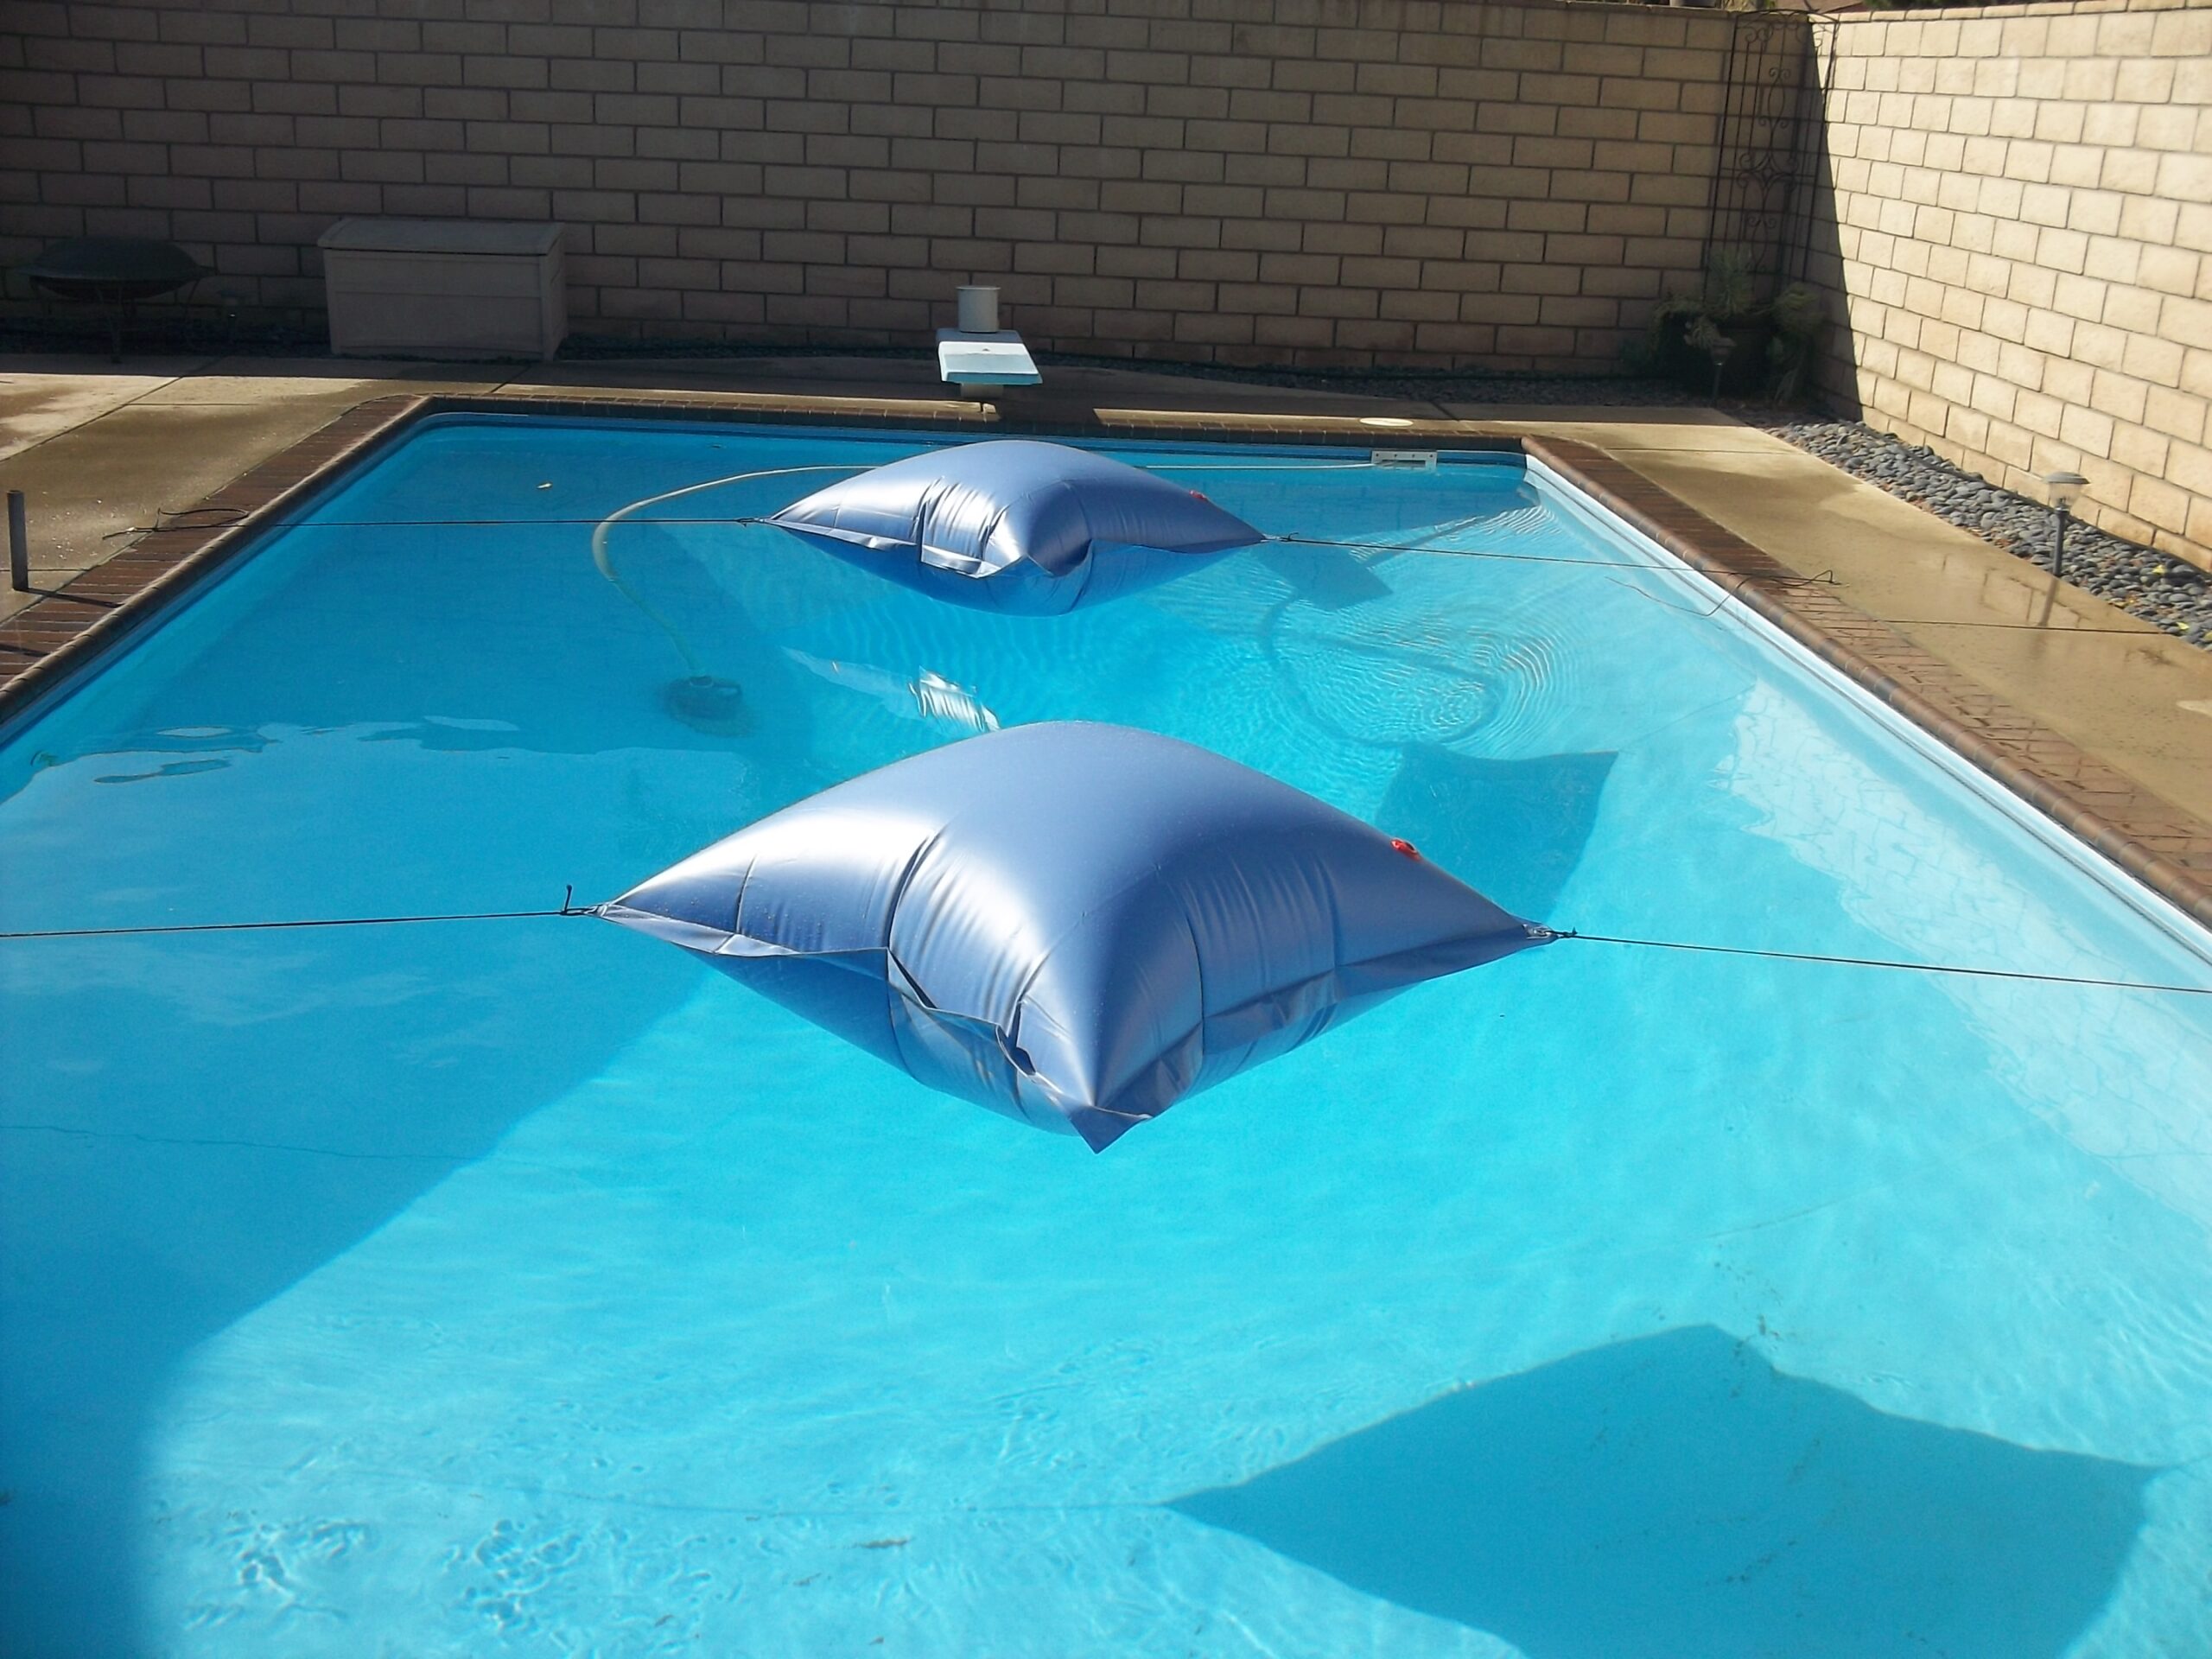 Air pillows secured over the pool before pulling the cover over the pool.